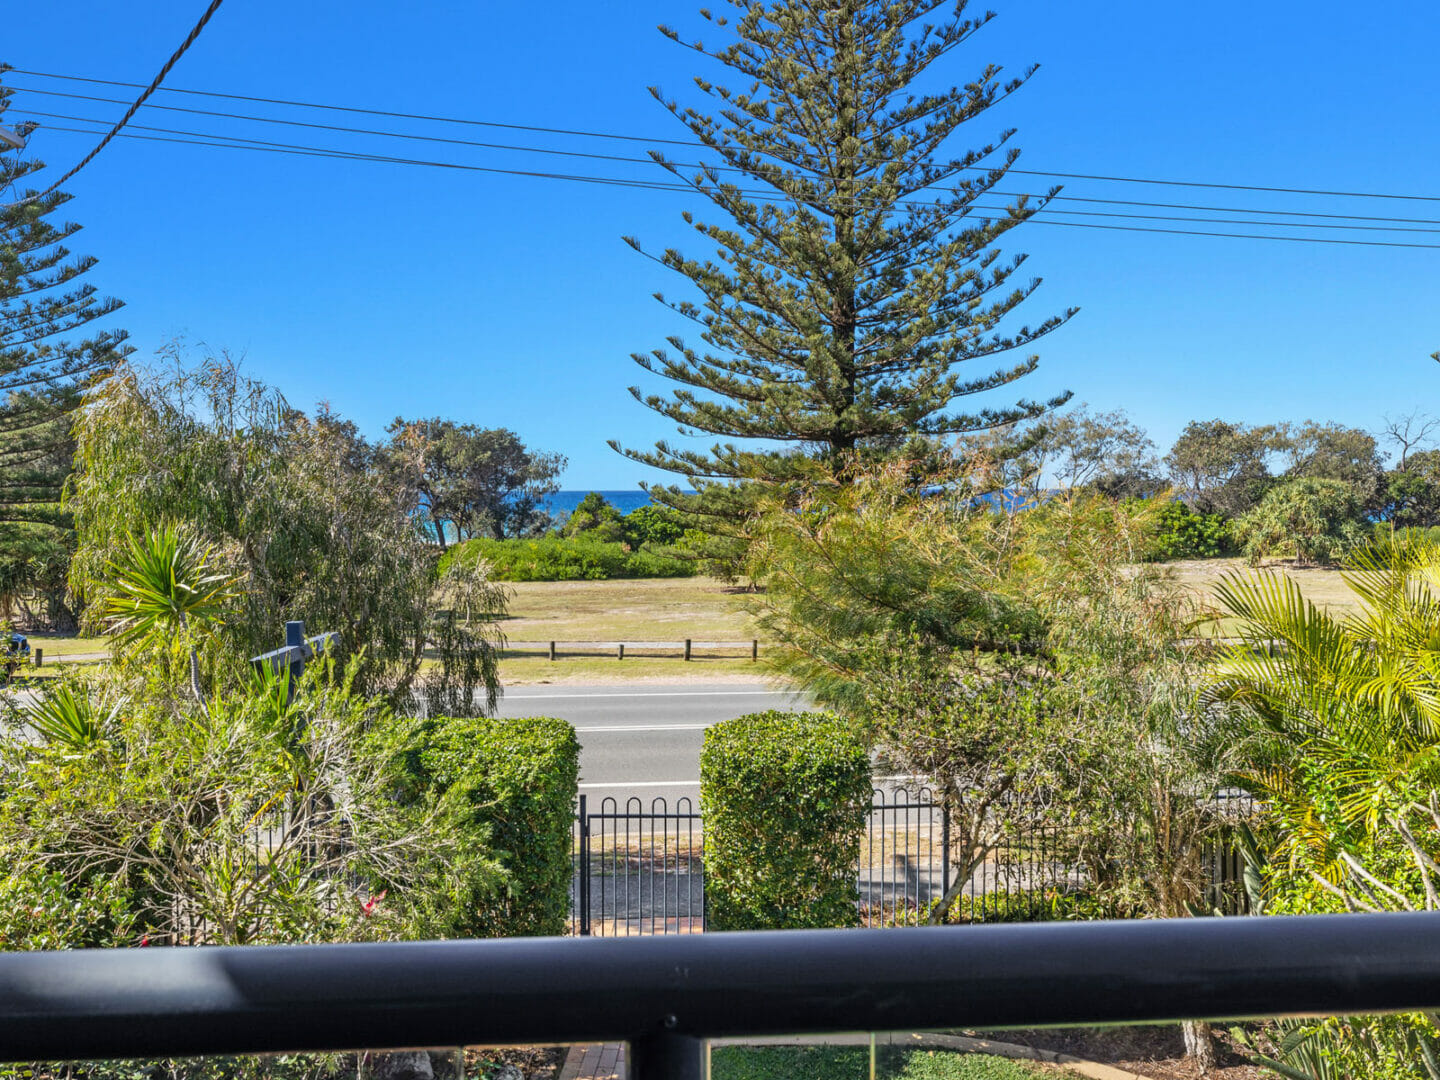 Balcony handrail with view beyond of foreshore parkland, trees an ocean